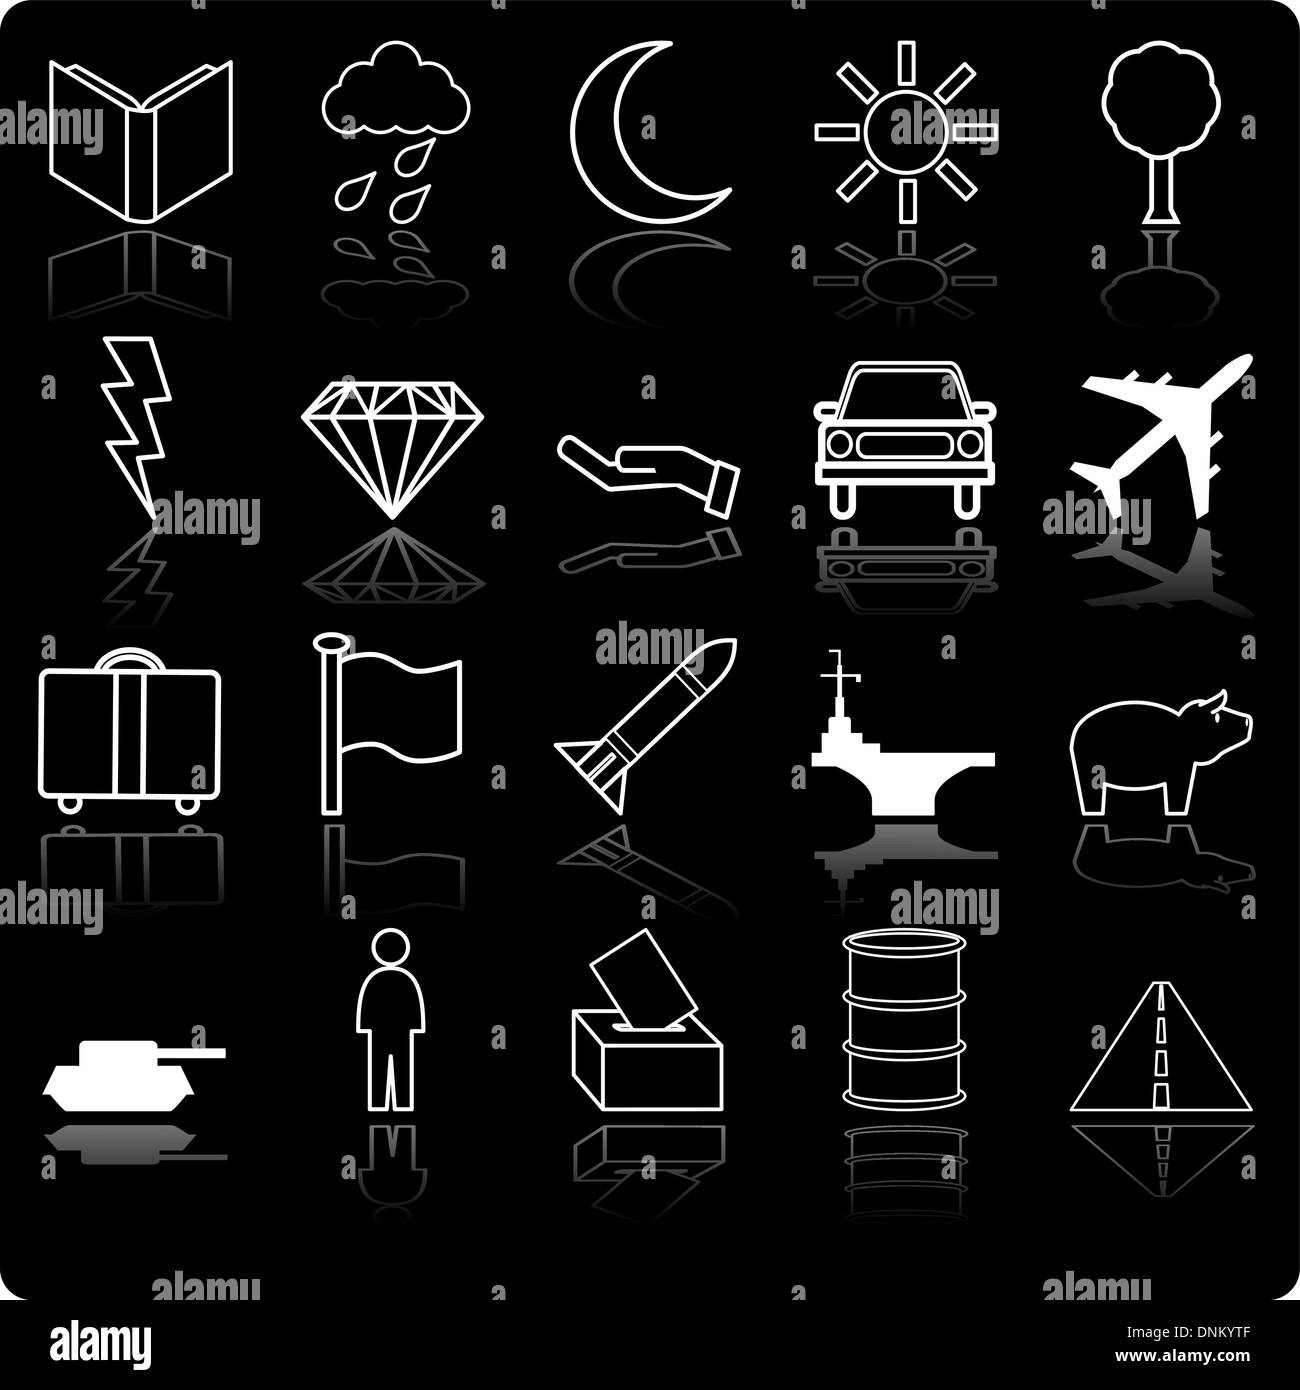 Demographic and Population icon series set Icon set with symbols like those commonly used to indicate demographics and populatio Stock Vector